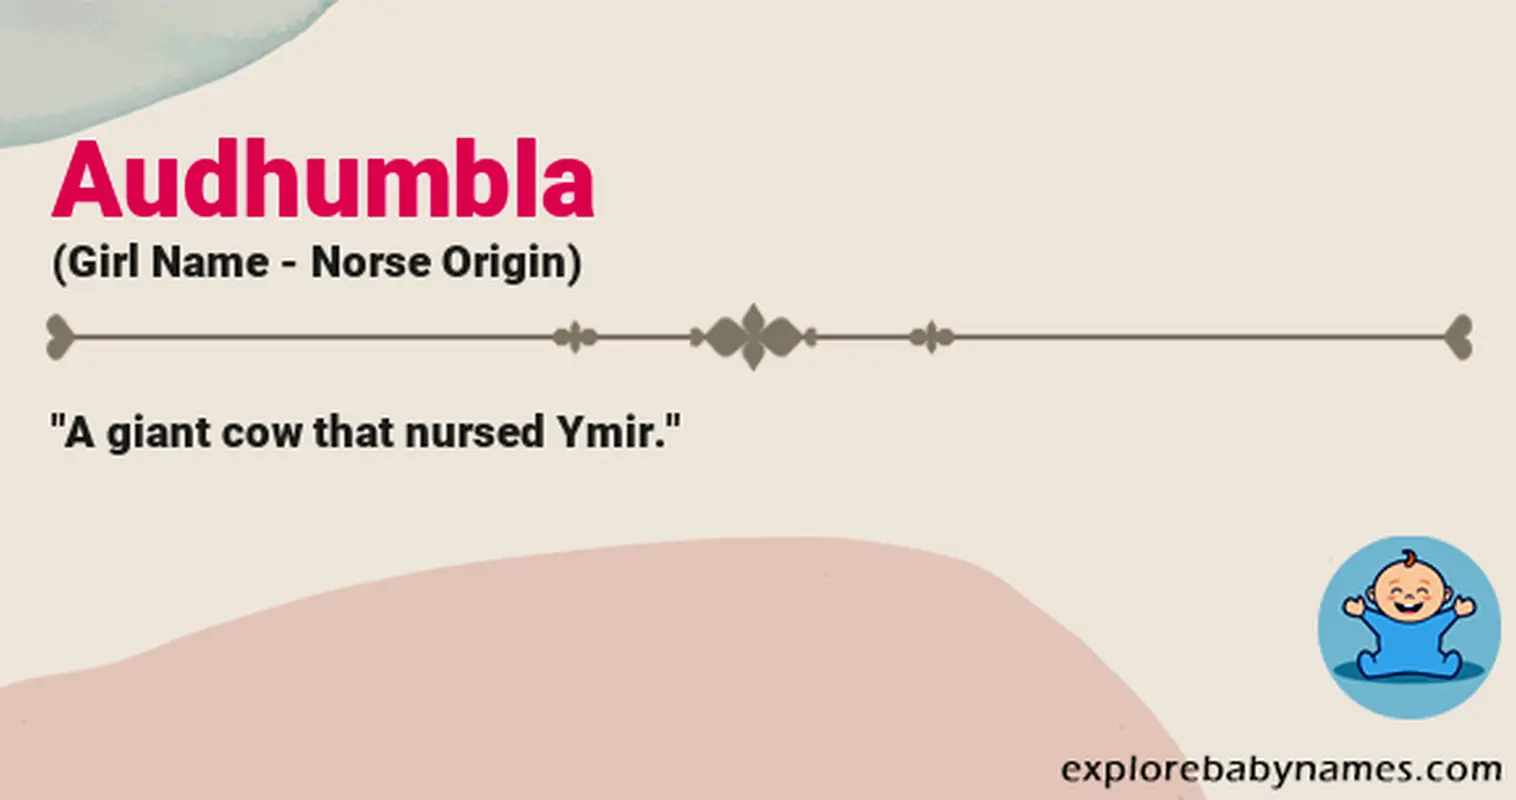 Meaning of Audhumbla